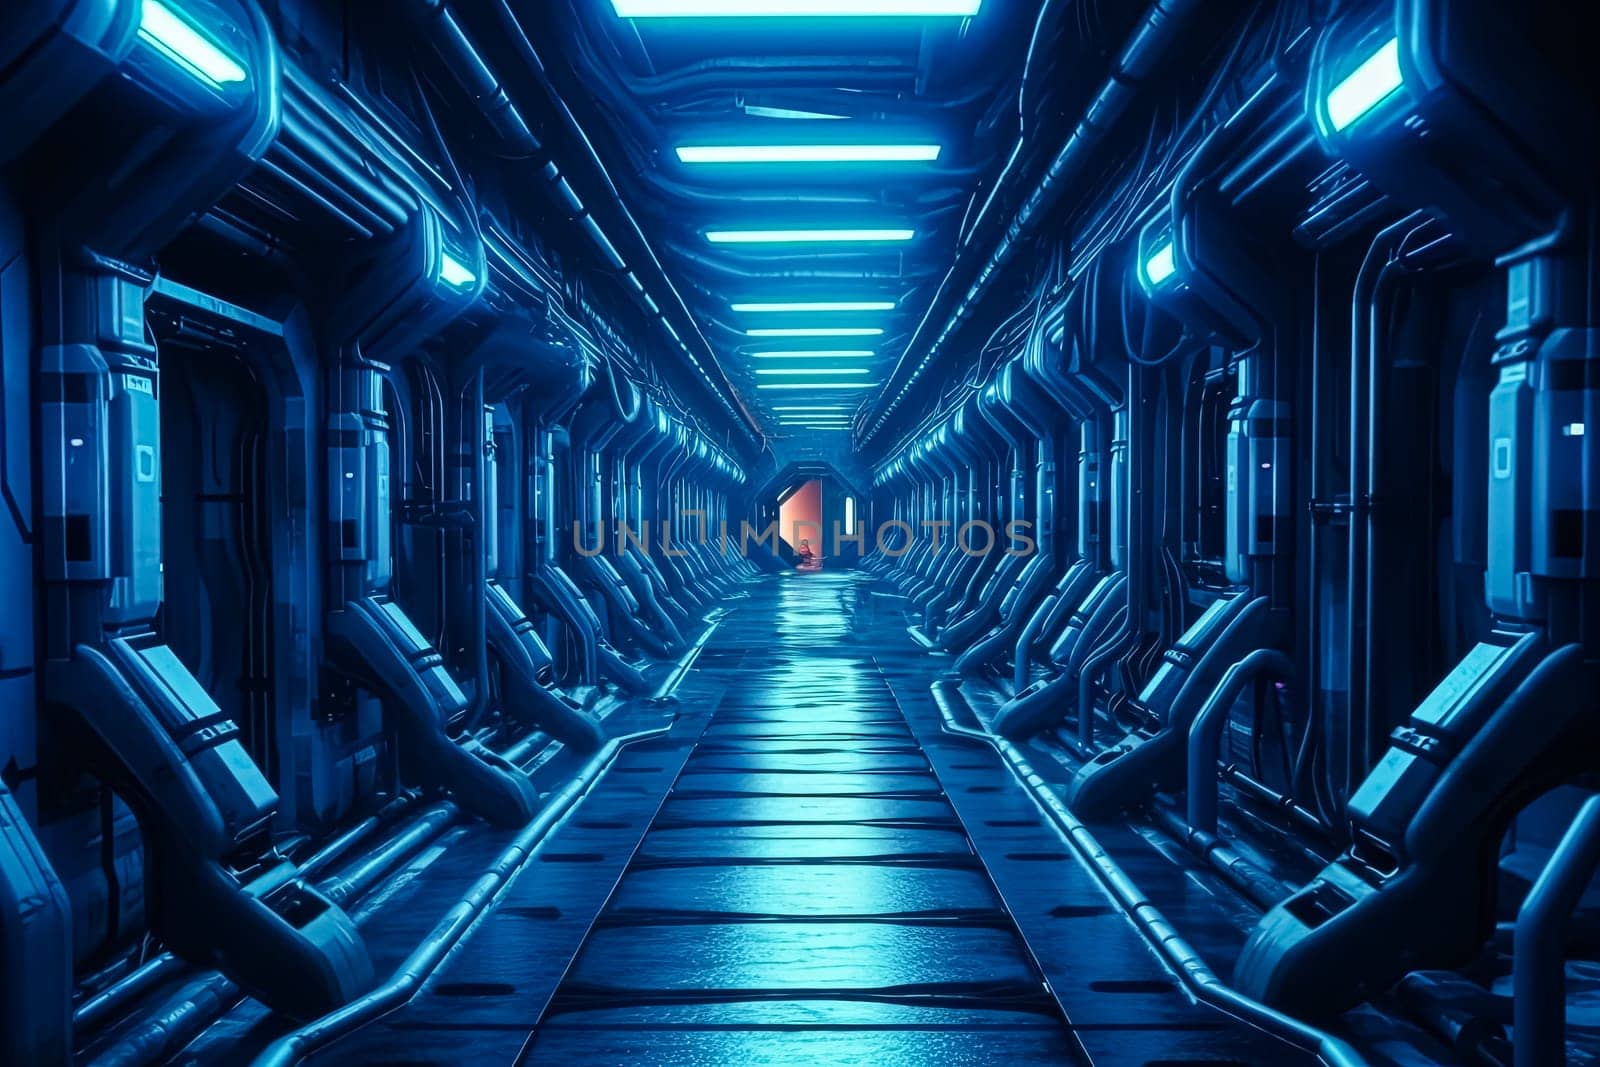 A long, narrow tunnel with blue lights shining on the walls. The tunnel is empty and he is a futuristic space